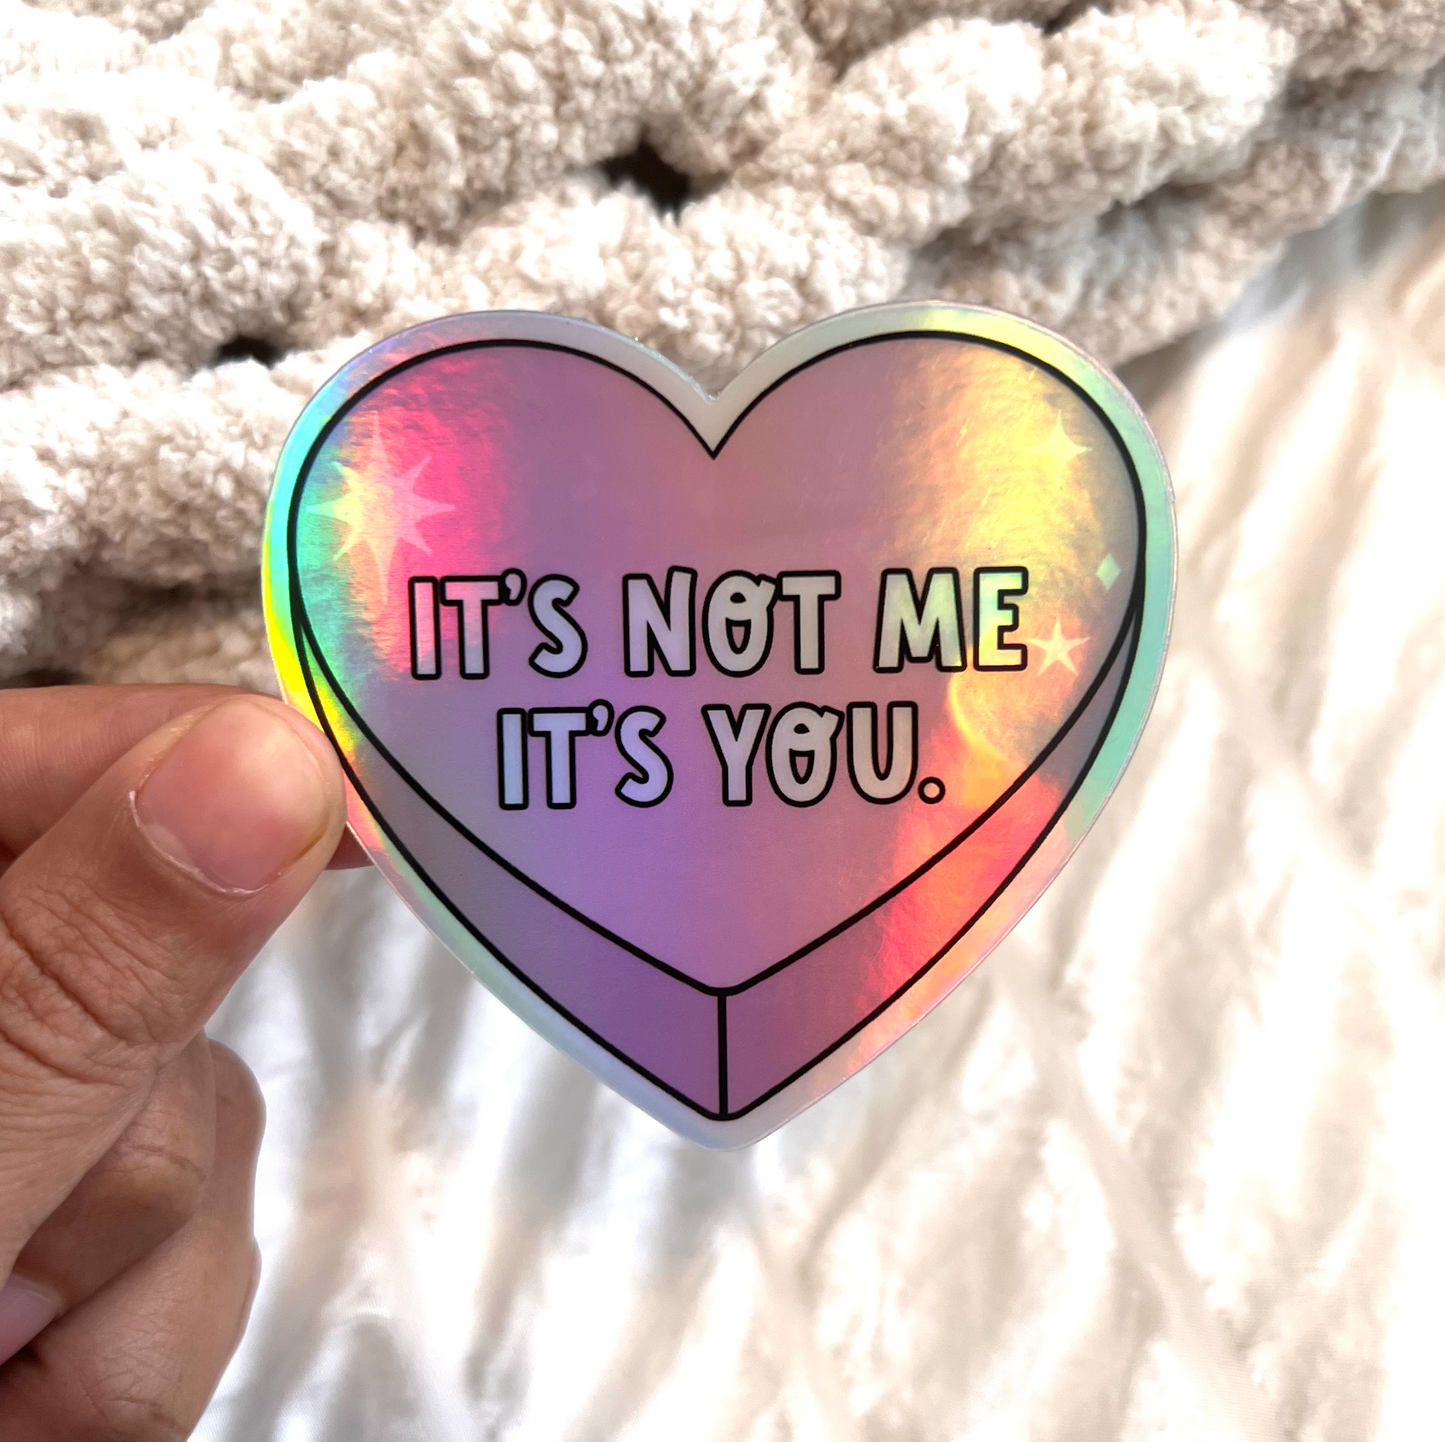 Holographic Heart Sticker